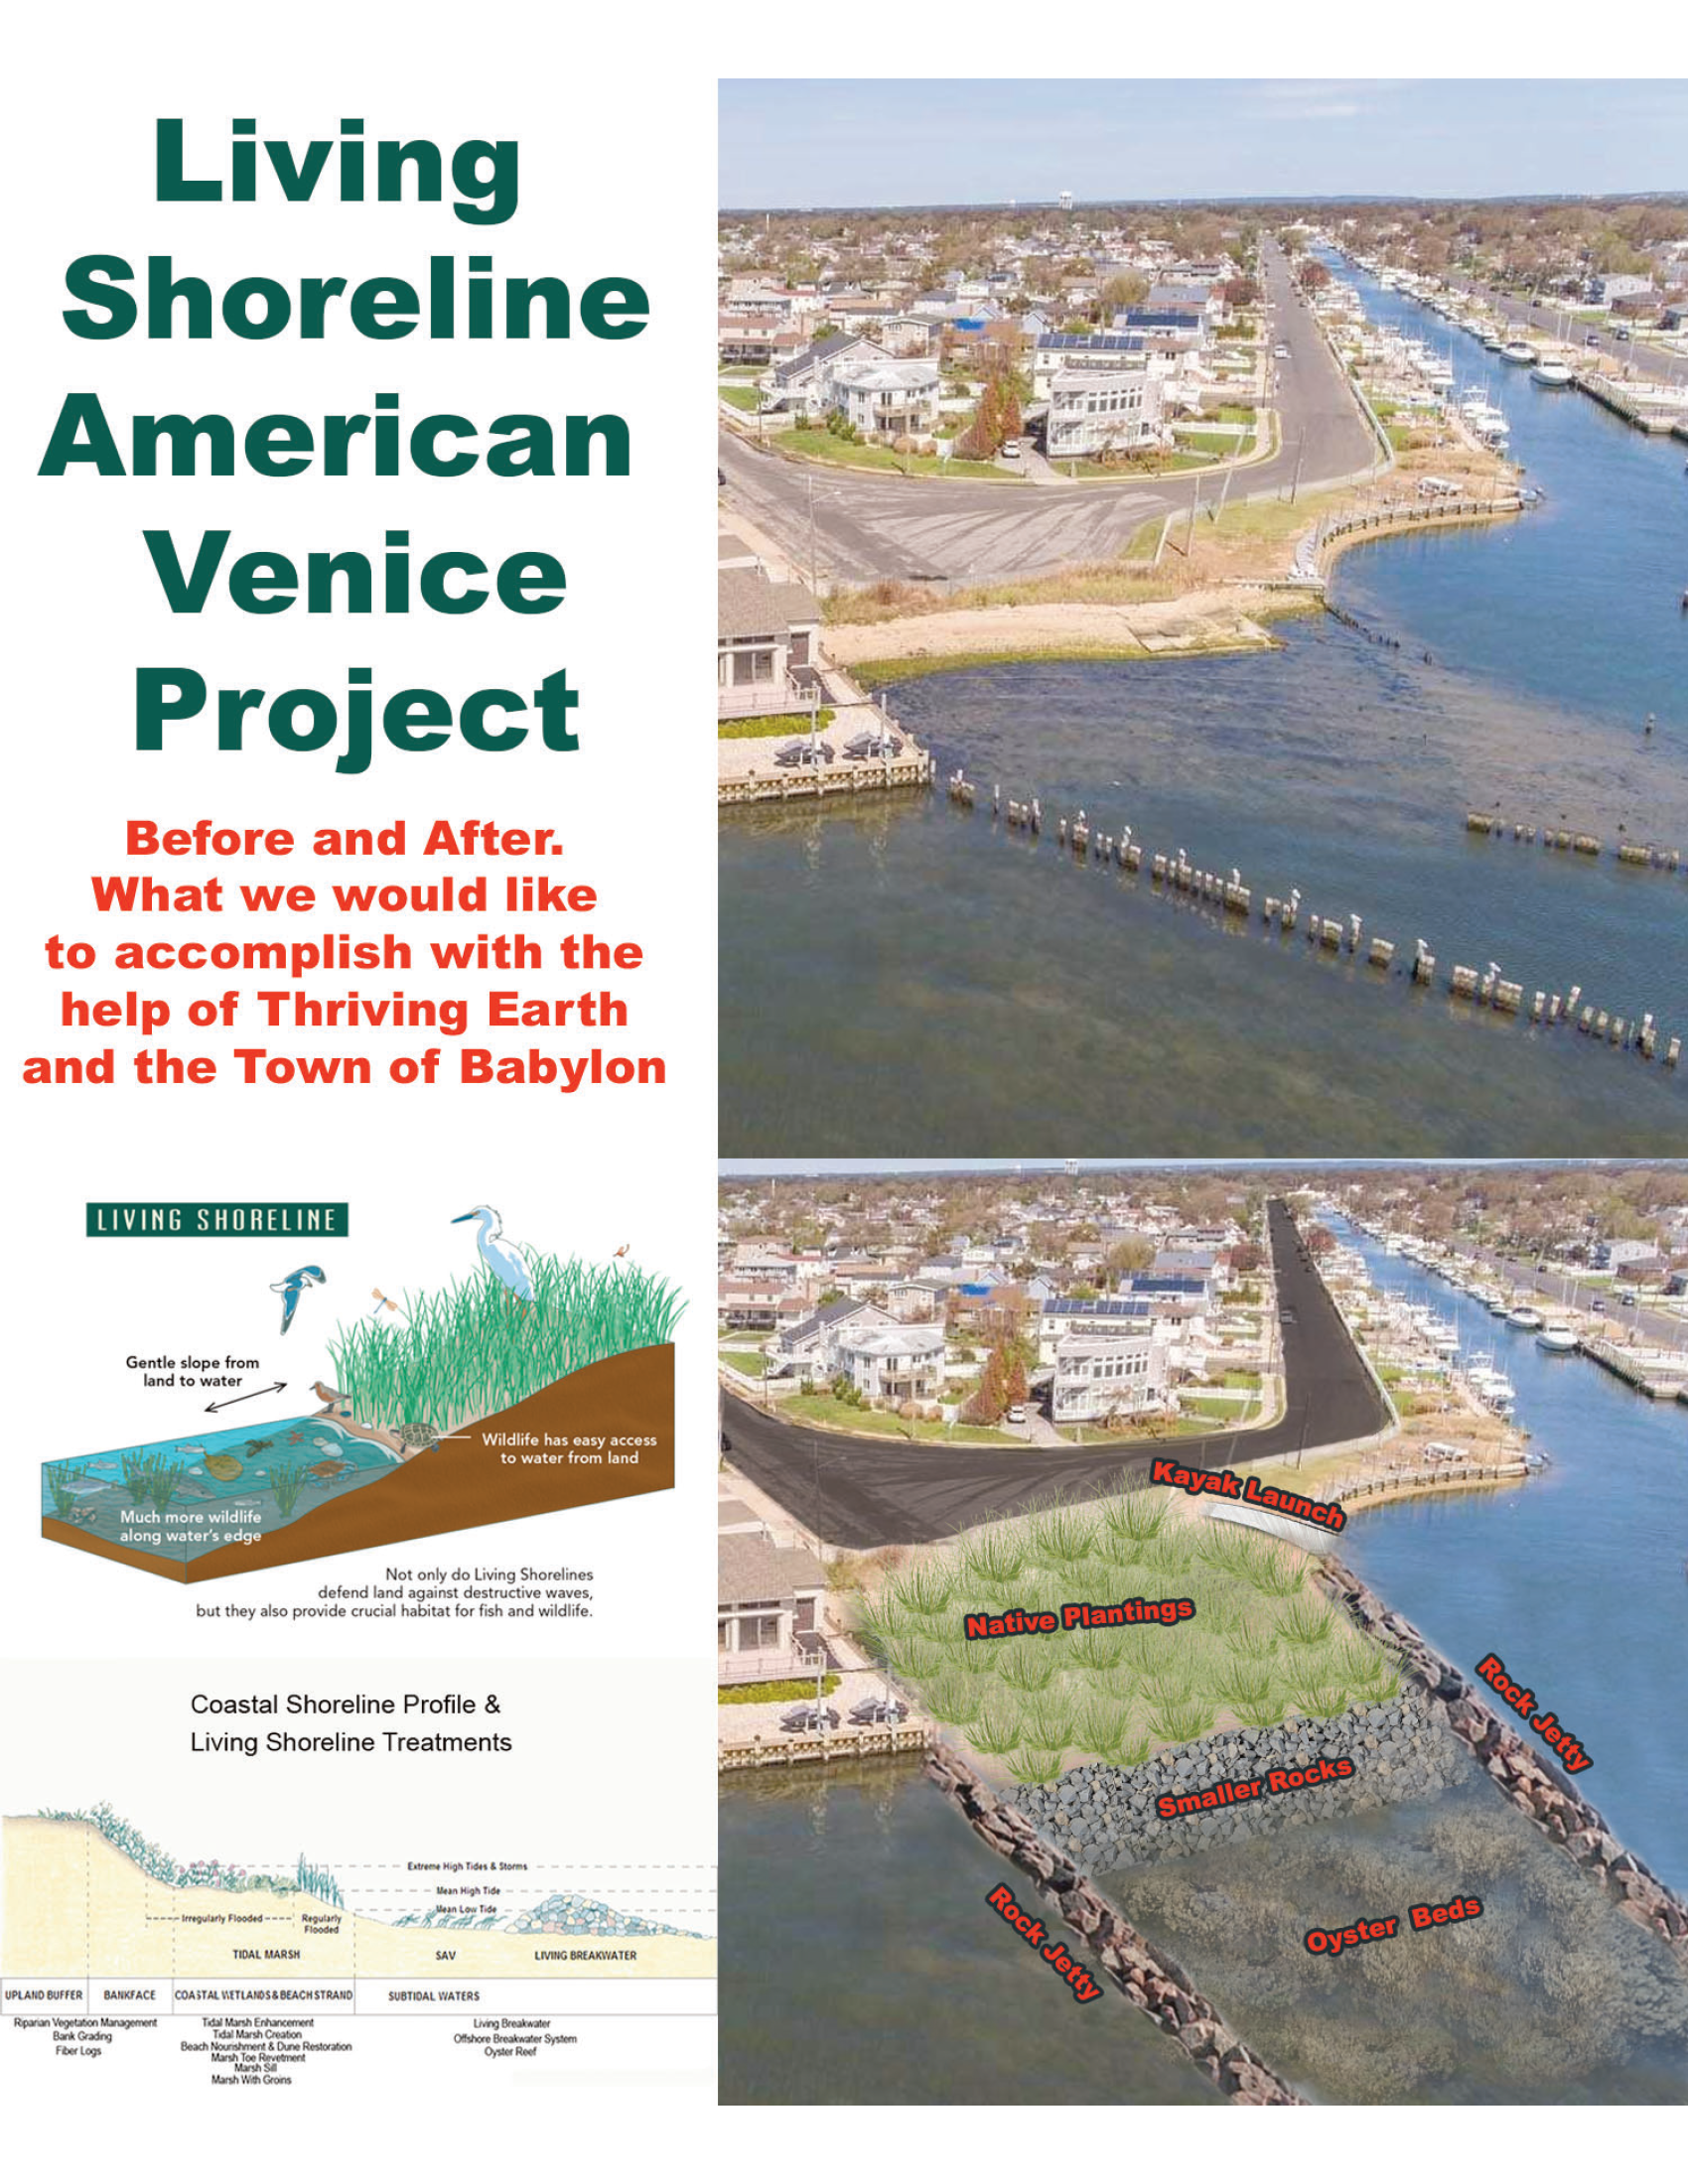 Imagen destacada del proyecto Designing a living shoreline to mitigate flooding and increase community resilience.